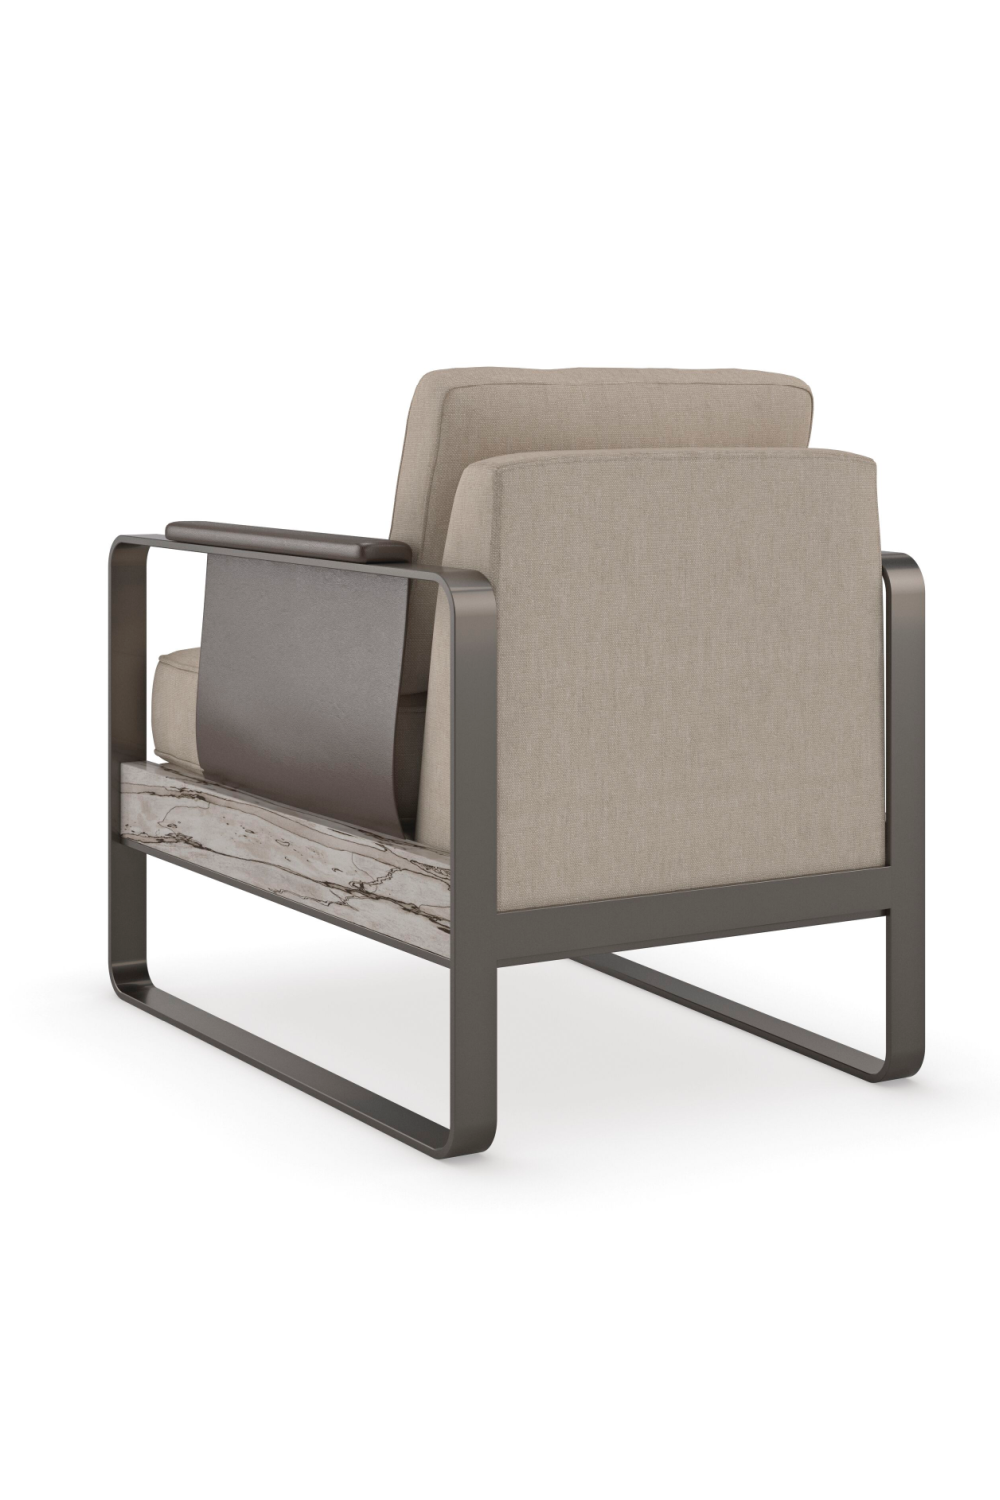 Industrial Style Lounge Chair | Caracole Arm In Arm | Oroa.com